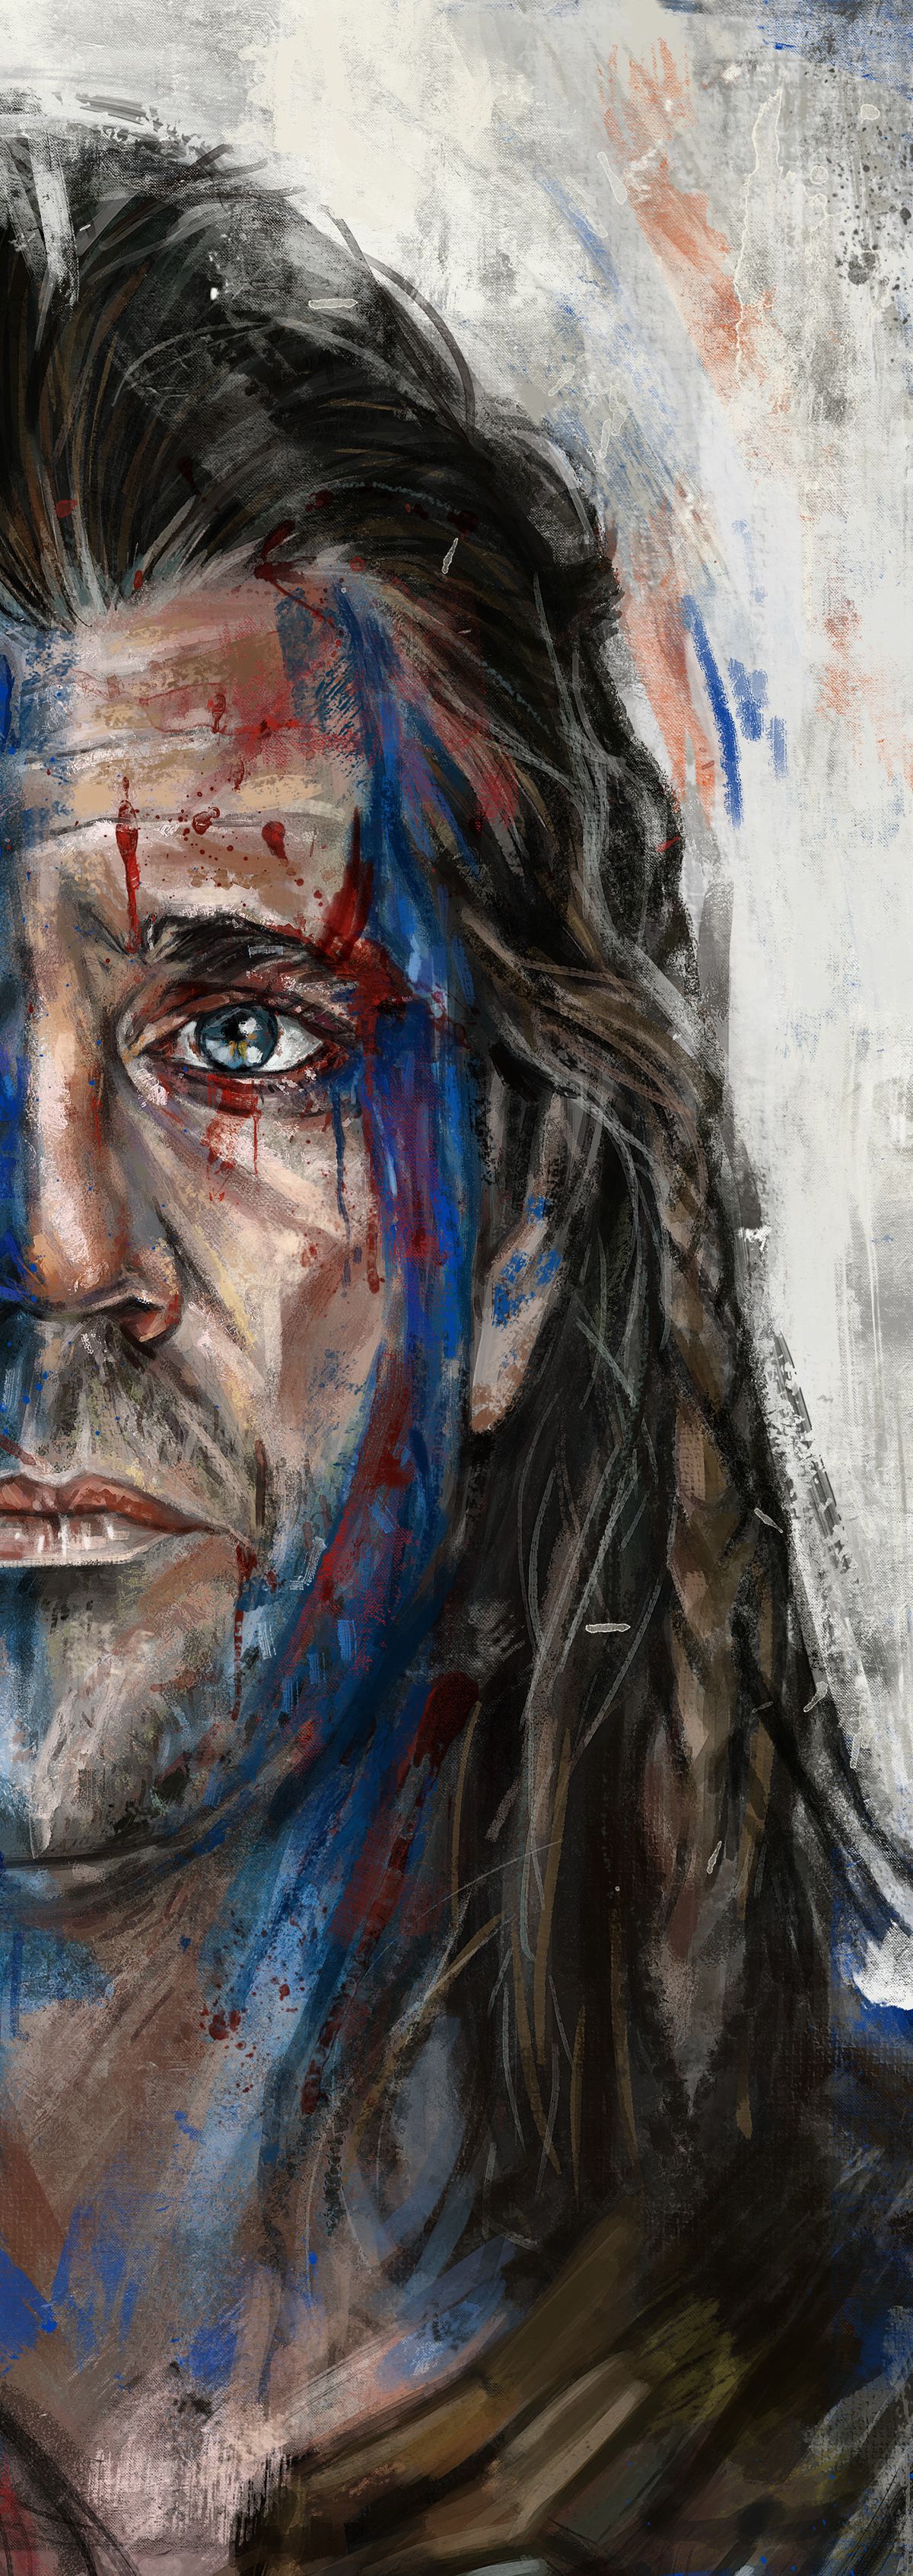 William Wallace. Braveheart, William wallace, Film posters art